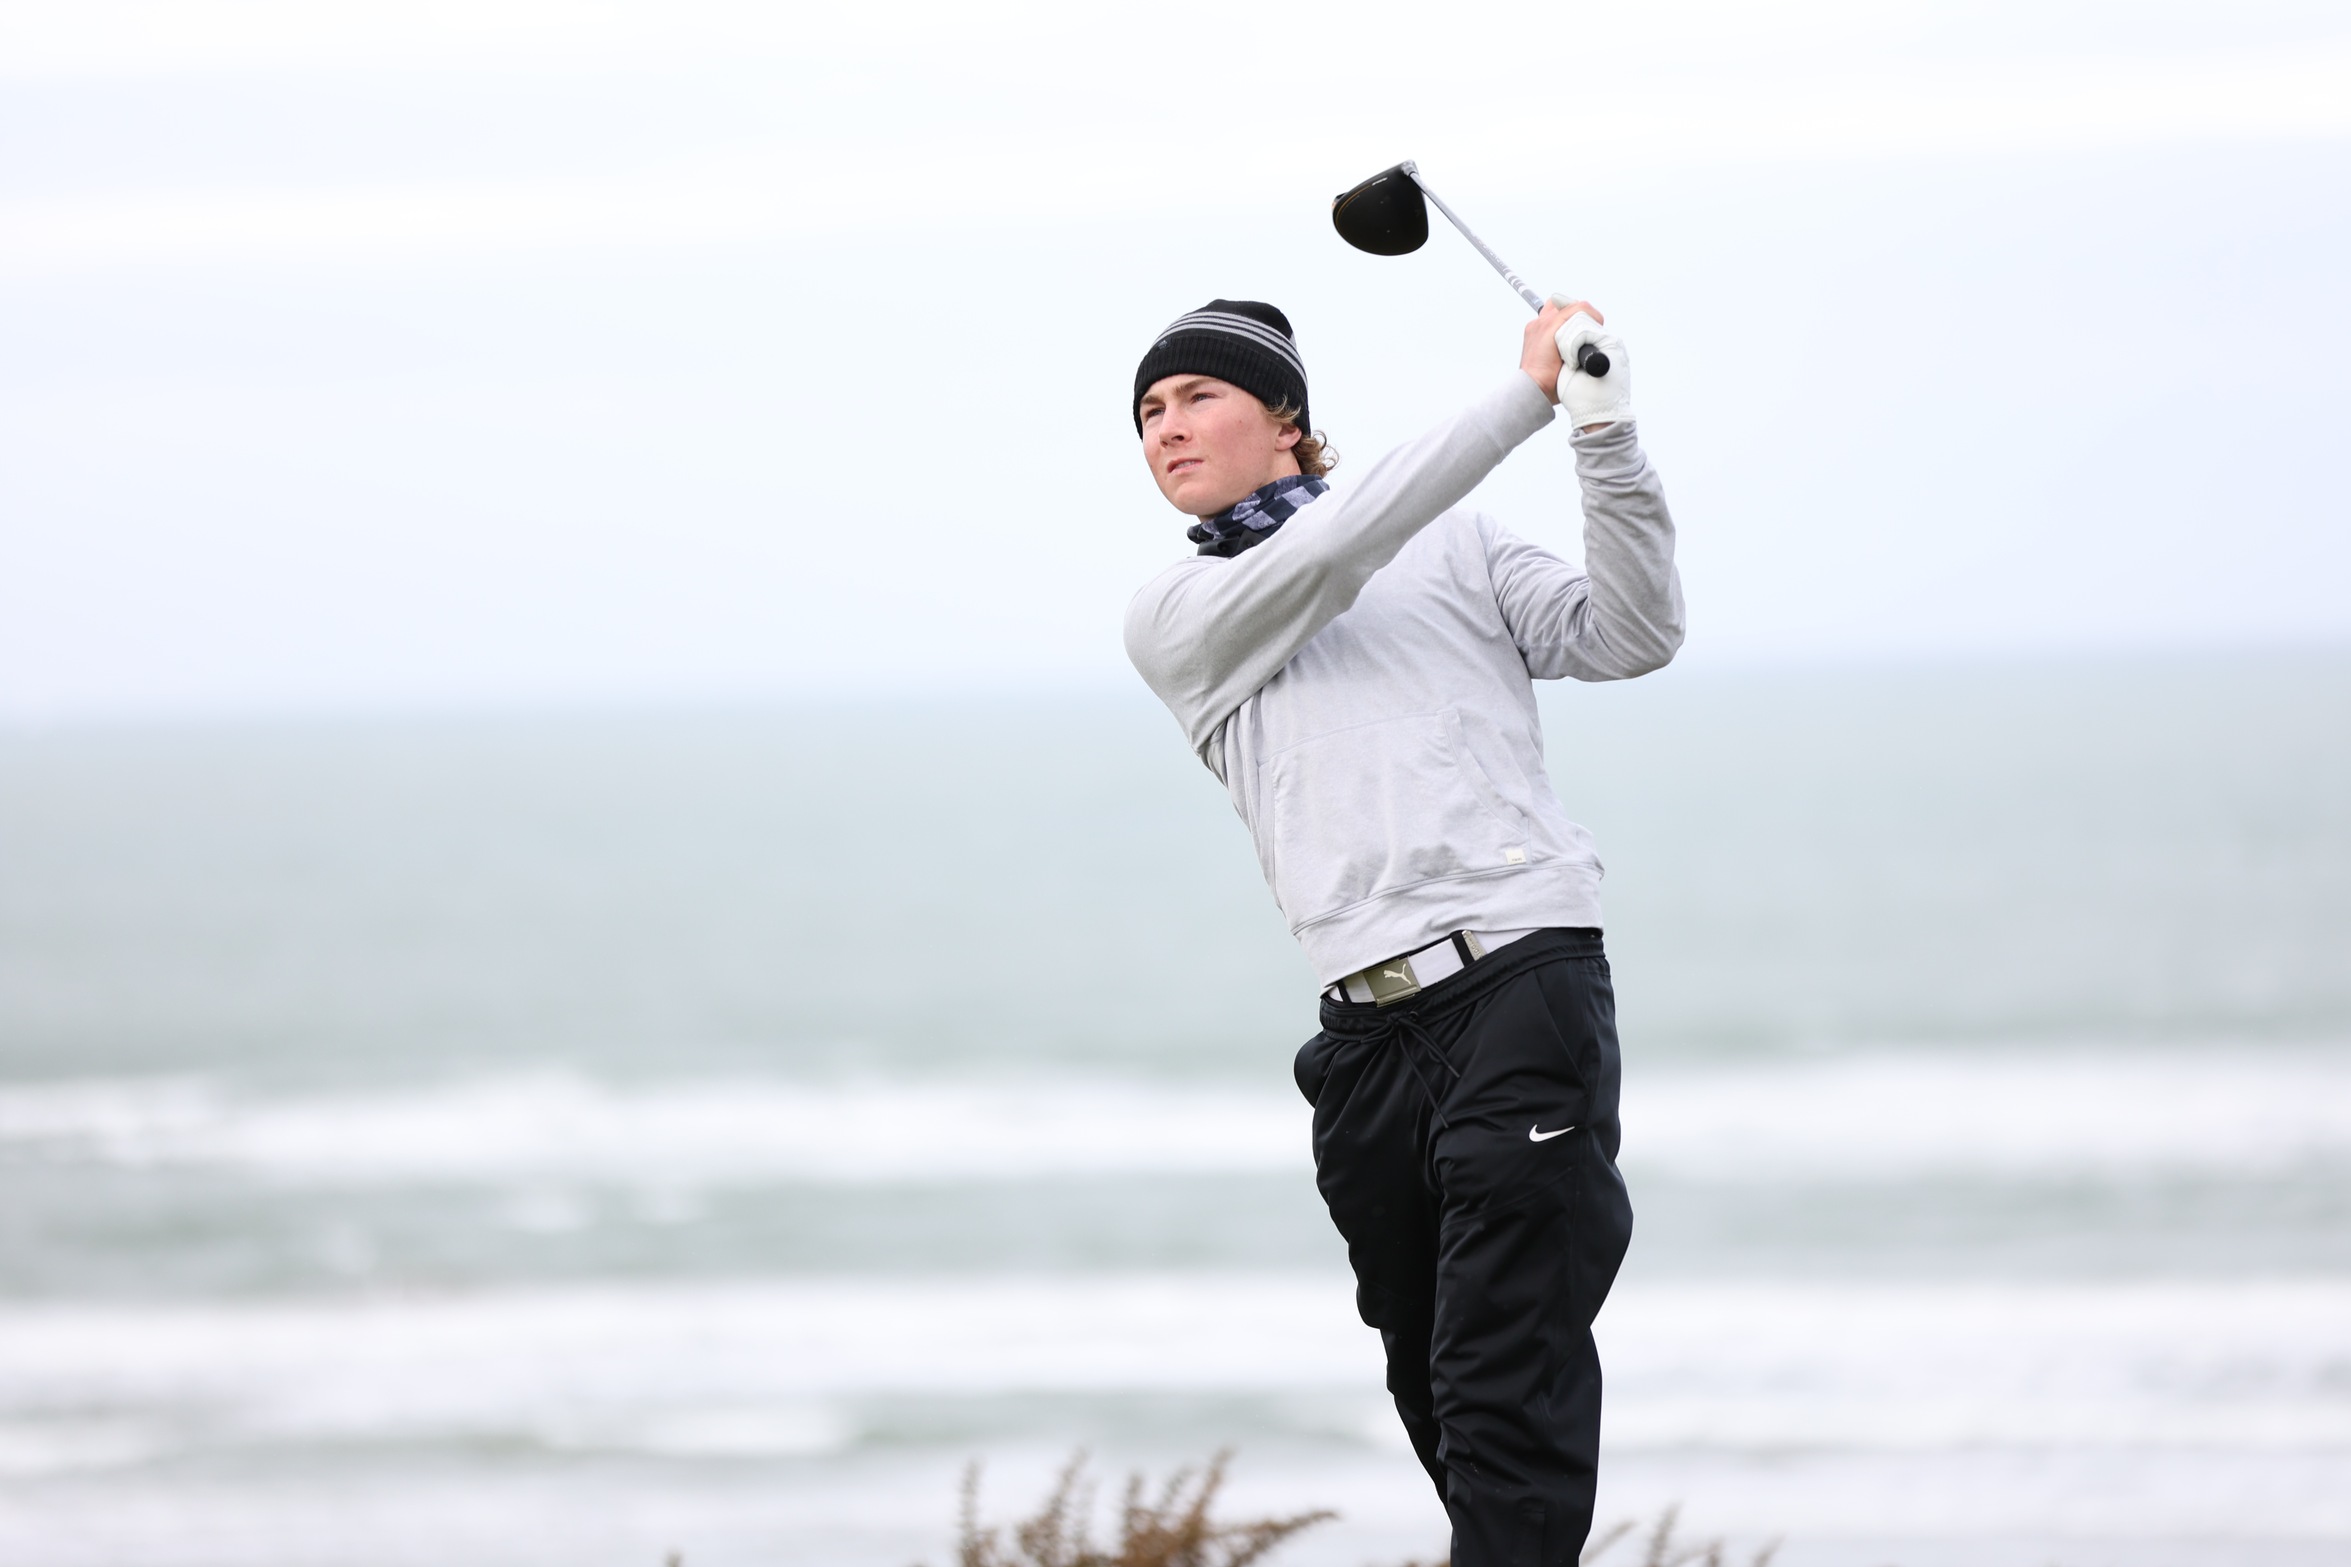 Overfelt Ties For Third With Final Round 72 At Bandon Dunes Championship